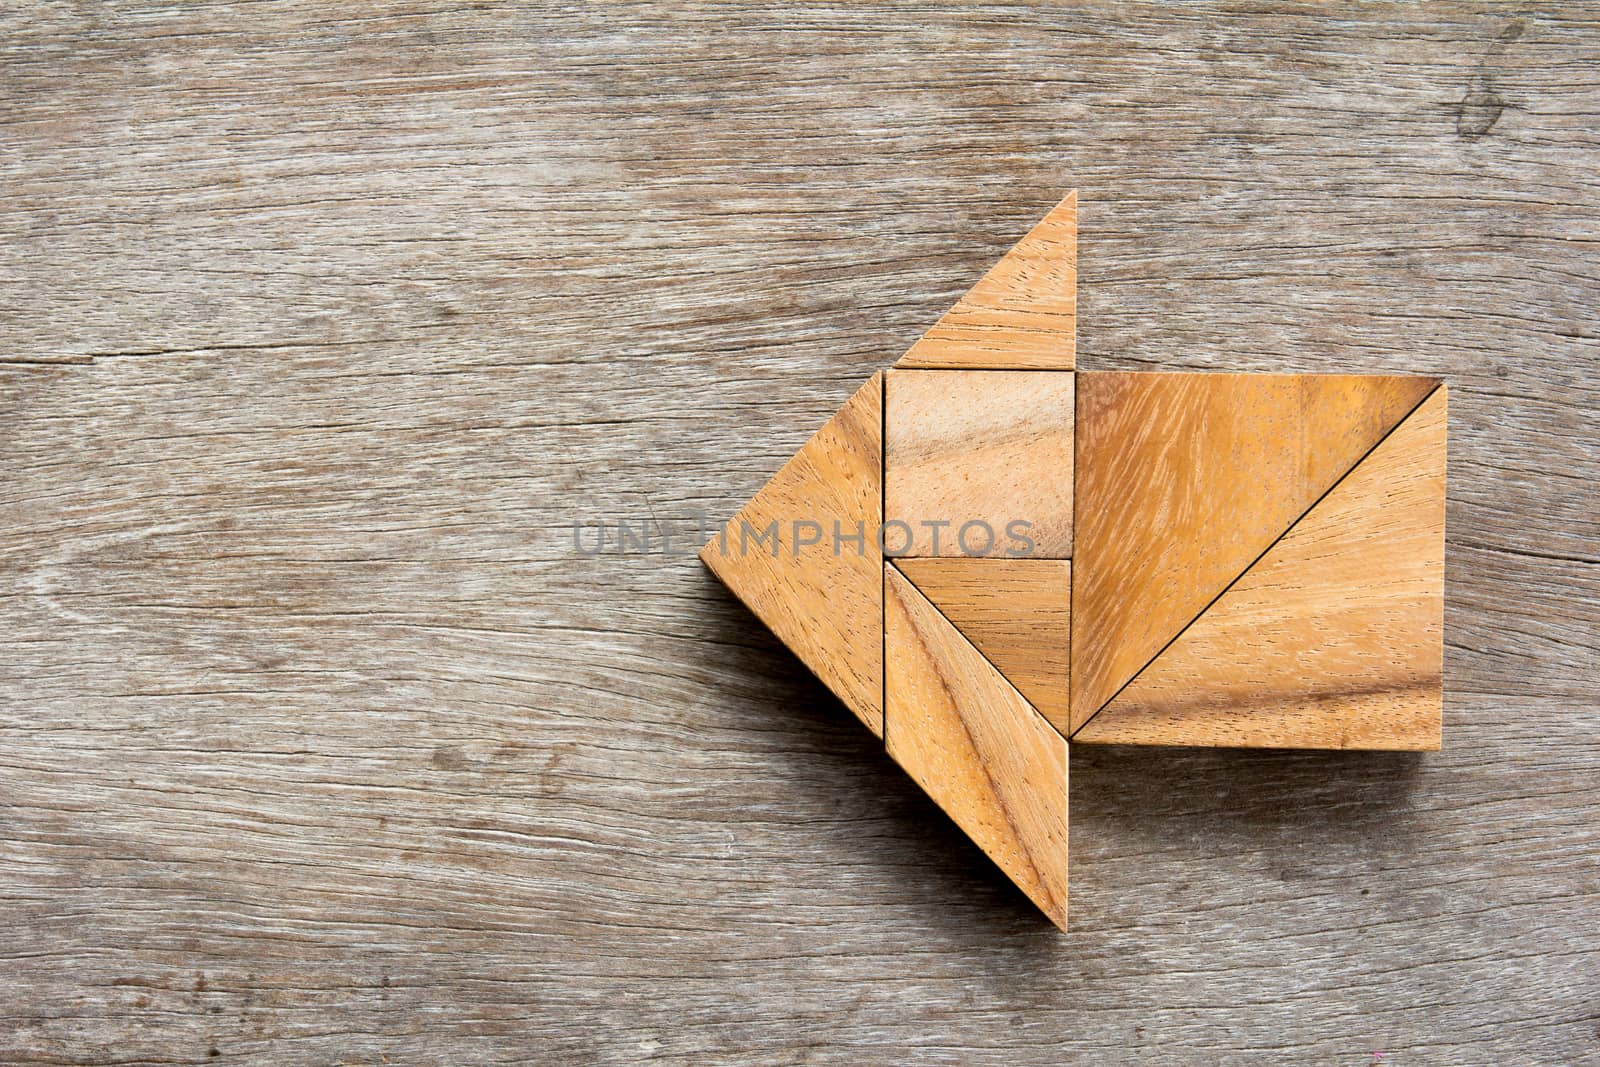 Tangram puzzle in arrow shape on wooden background